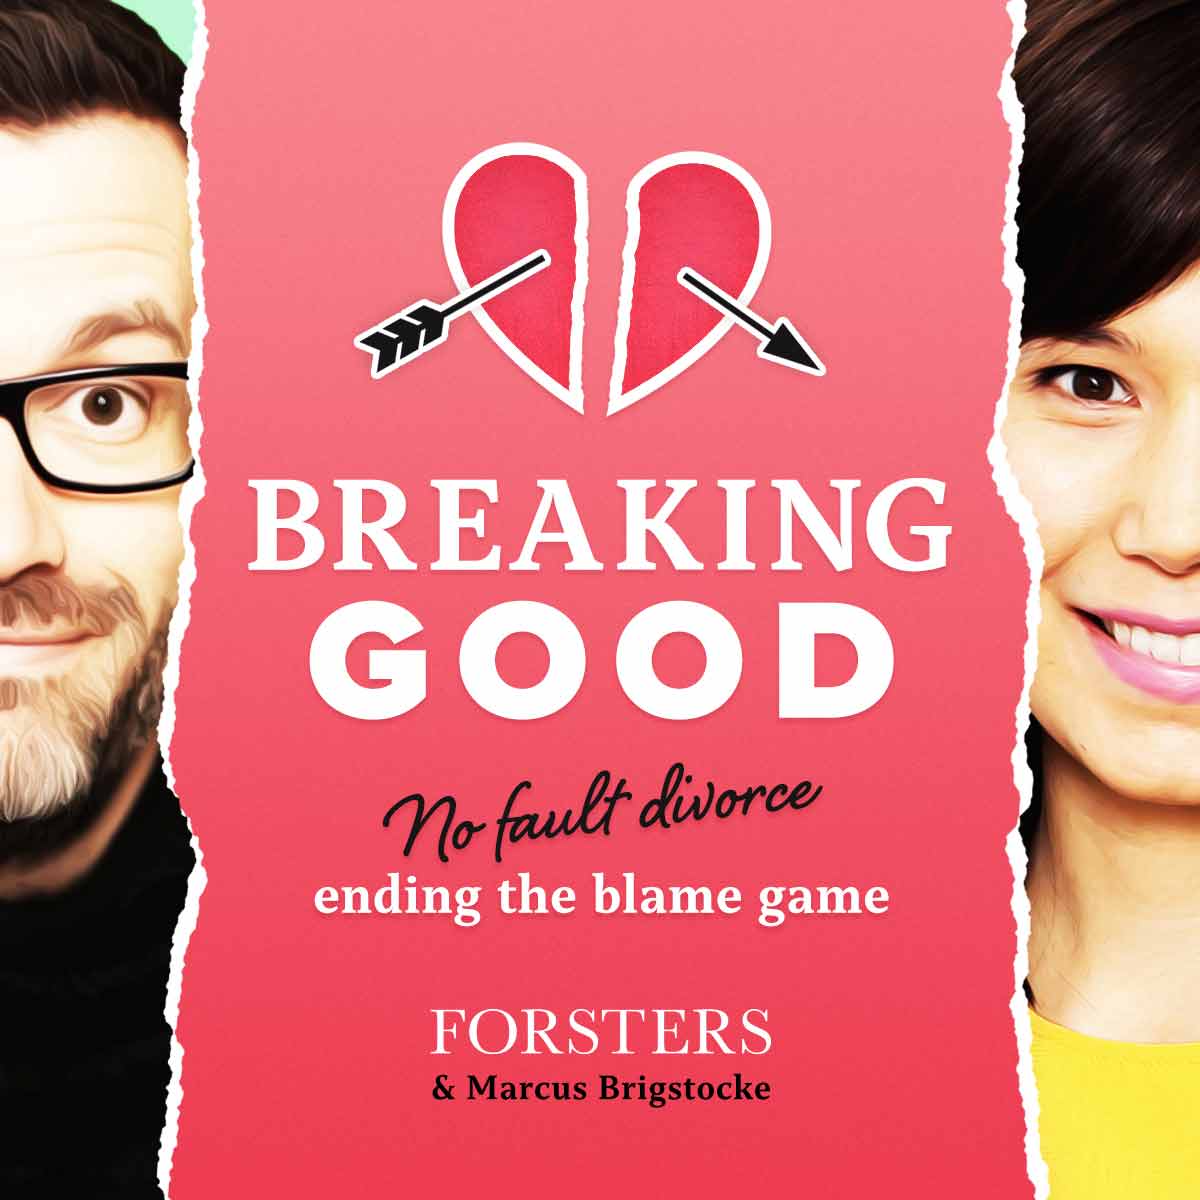 Breaking Good - Rethinking Separation and Divorce podcast graphic